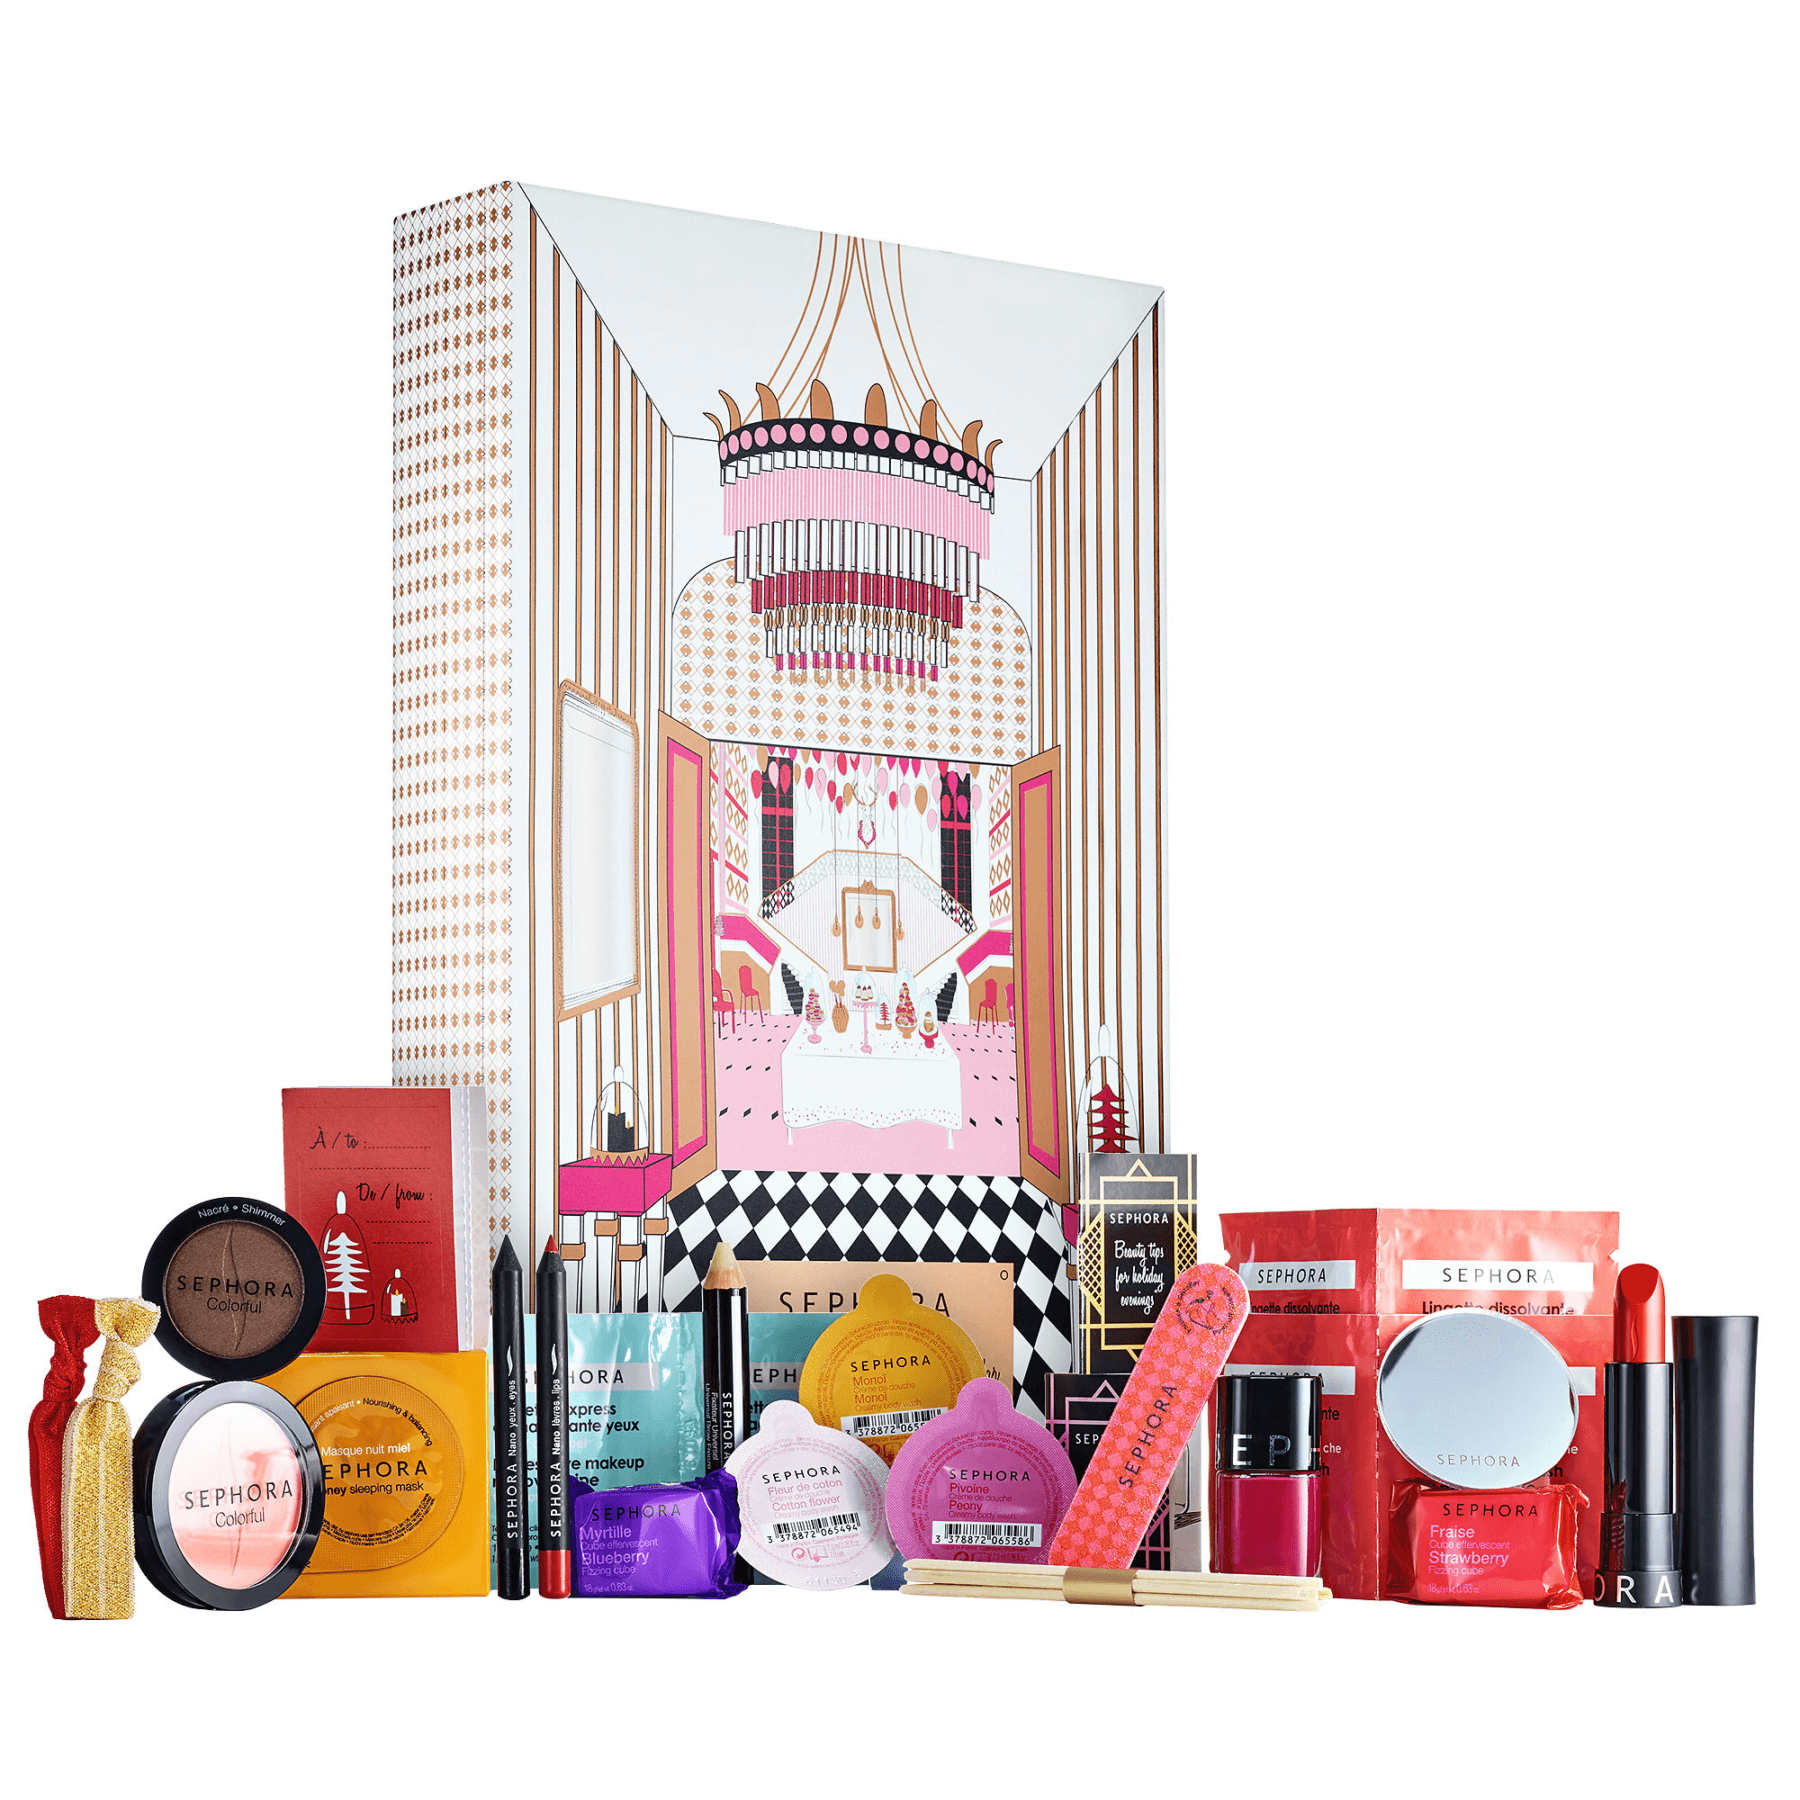 2016 Sephora Advent Calendar Available Now + Coupons Hello Subscription